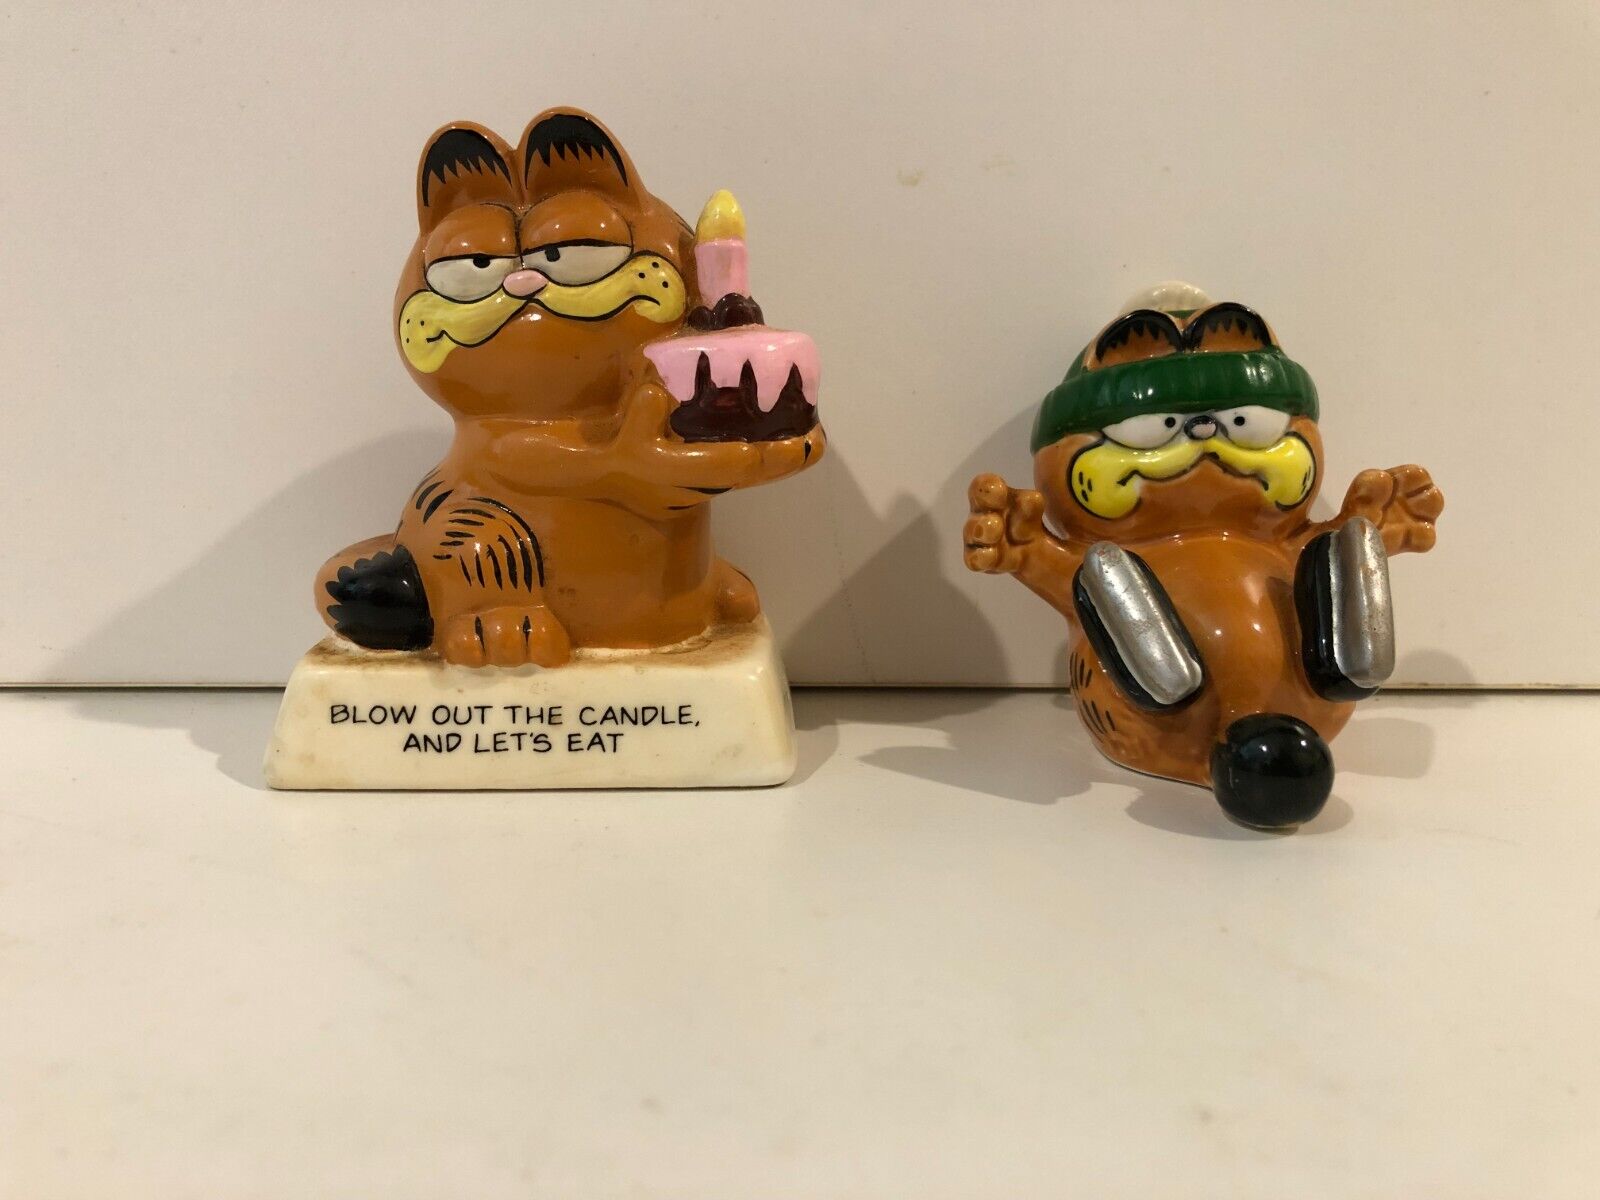 Vintage Enesco lot 2 Garfield Figurines, Birthday Blow Out Candle, Fall Skates